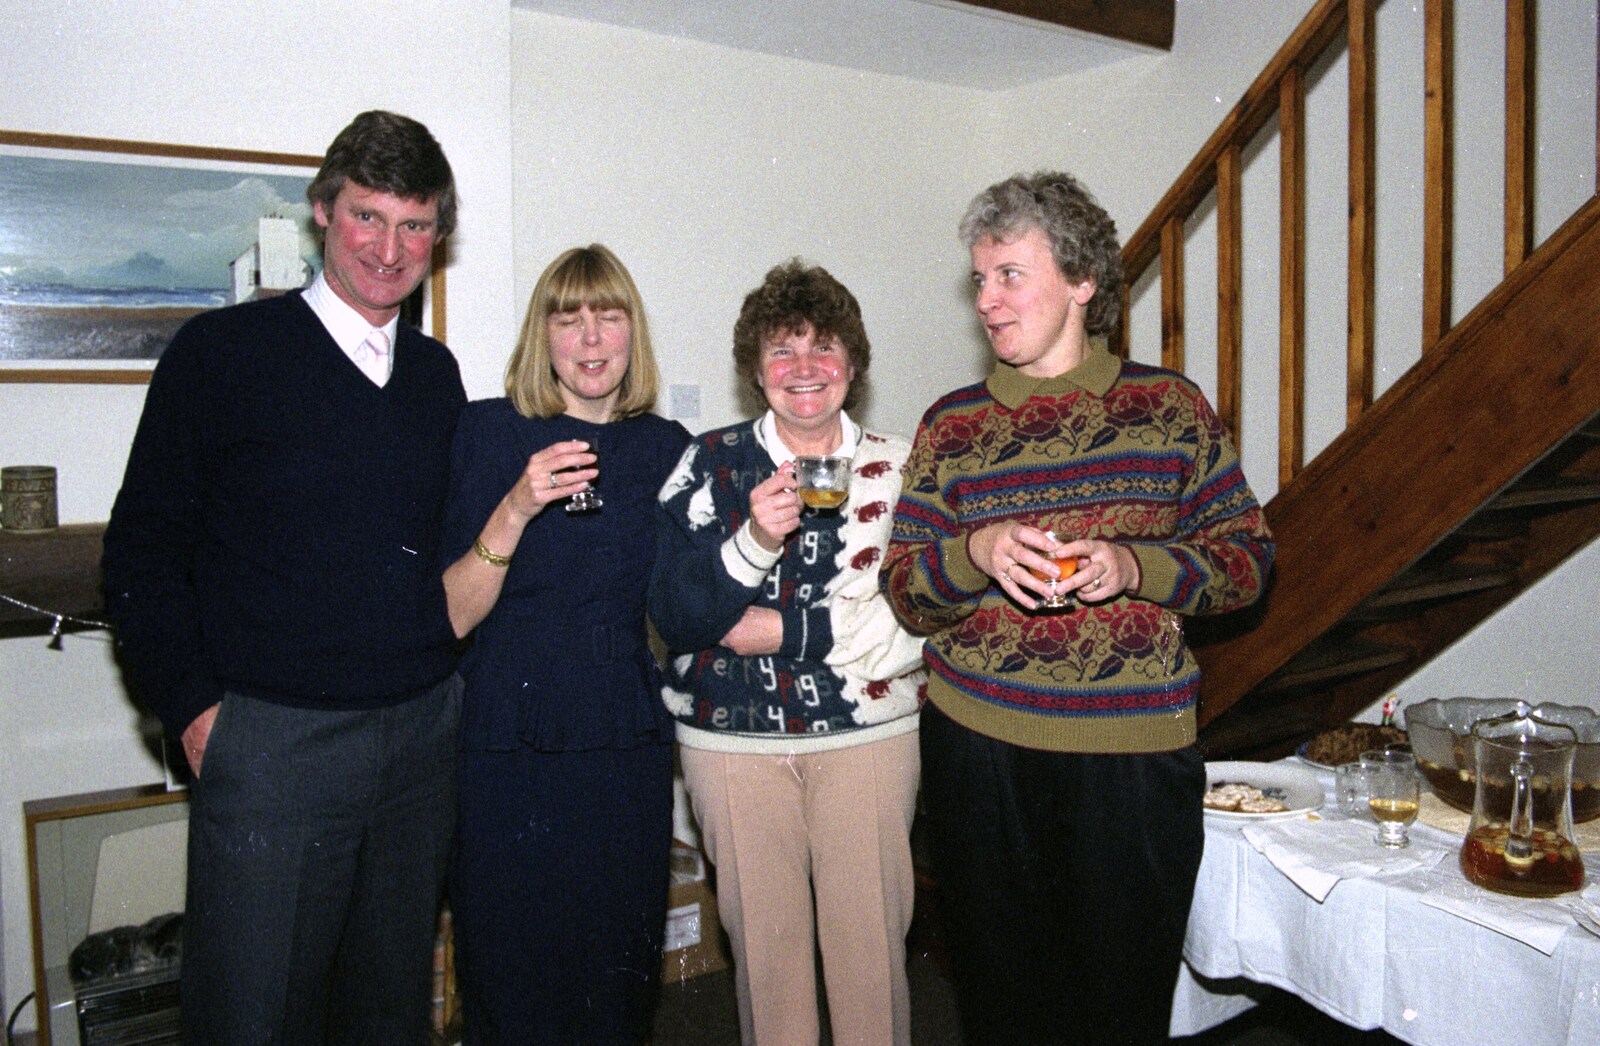 Geoff, Janet, the mother and Linda from Pre-Christmas Dinner and a Next-Door Do, Stuston, Suffolk - 20th December 1990